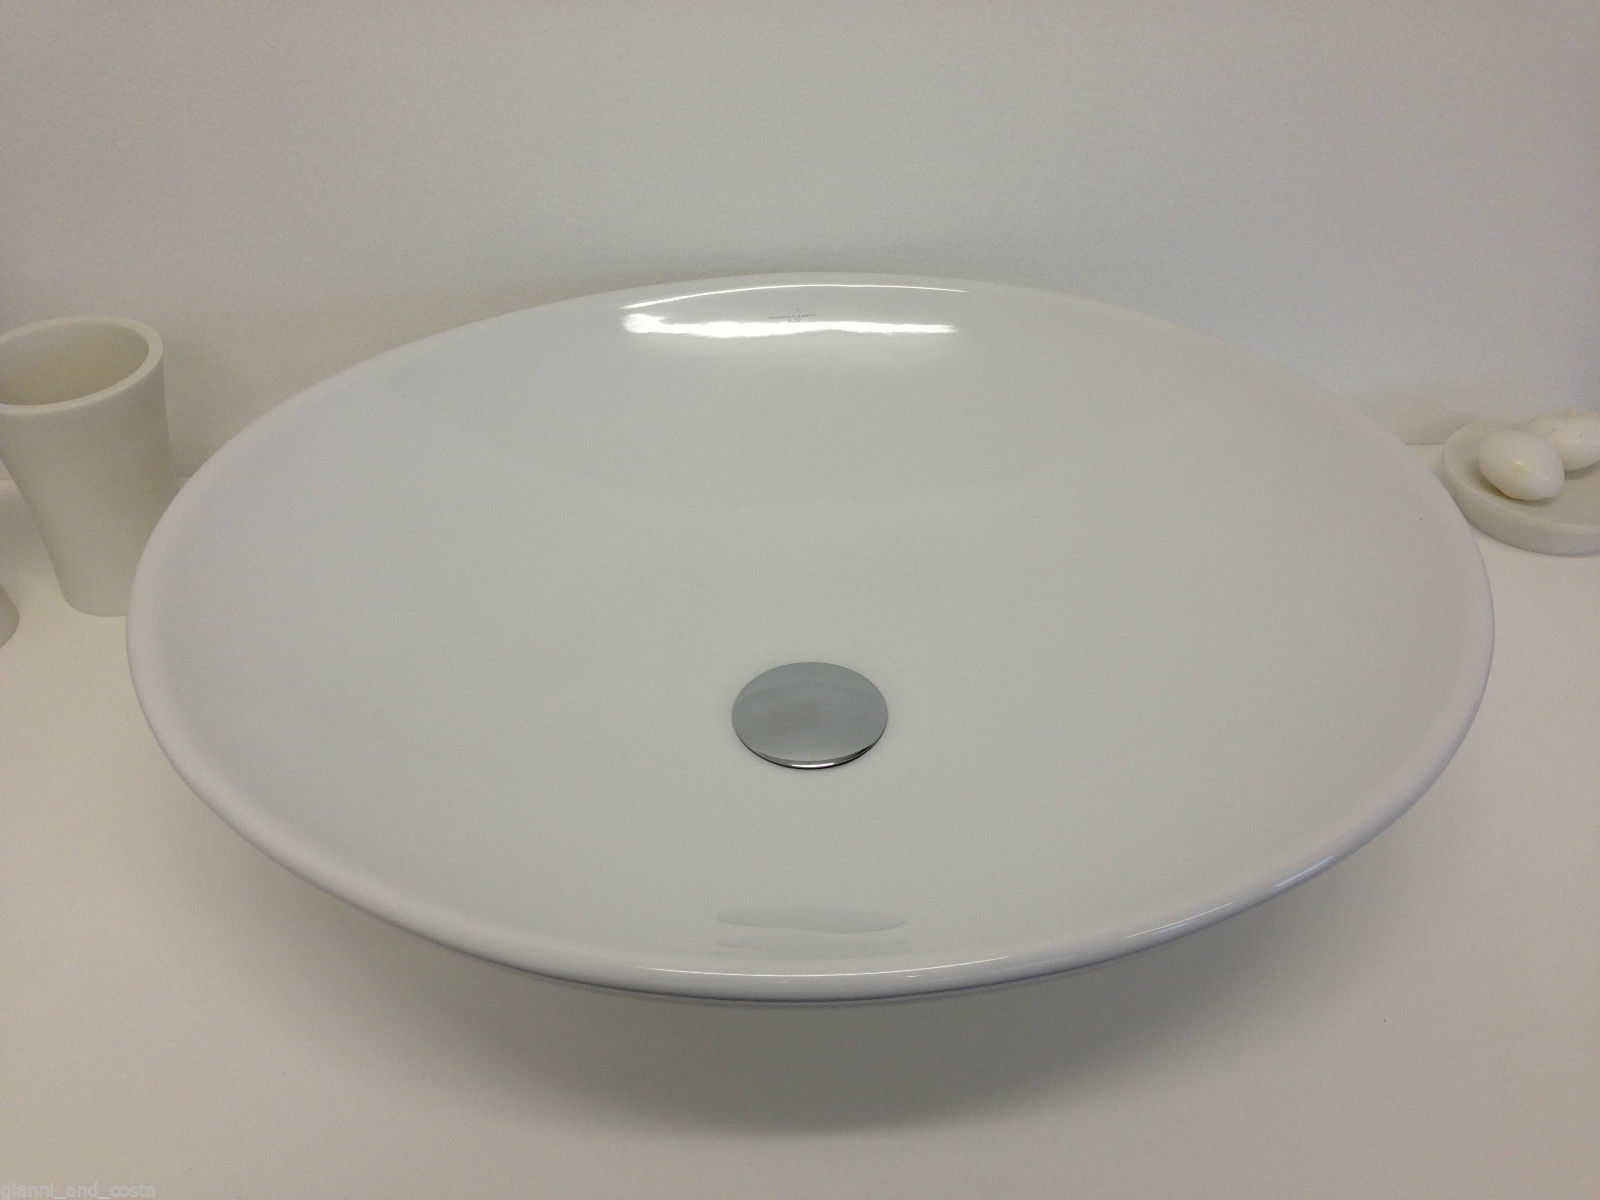  CERAMIC OVAL ABOVE COUNTER TOP BASIN FOR VANITY INCLUDES POP - UP WASTE